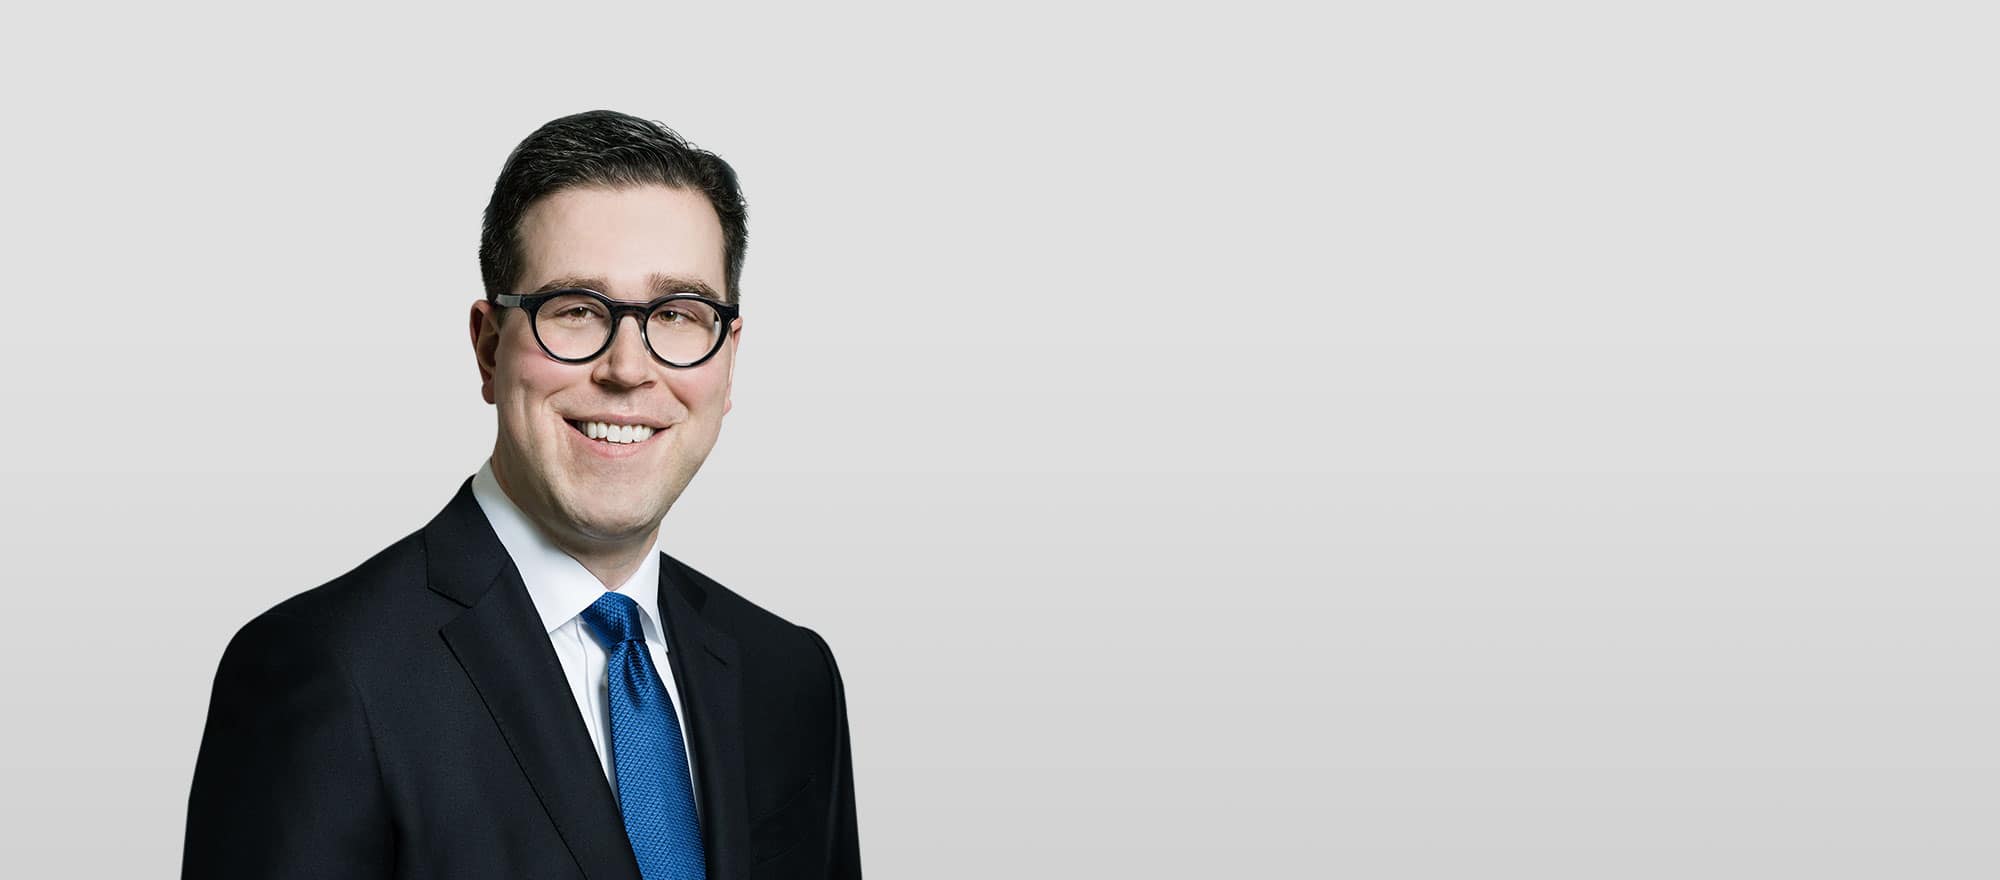 Mike Nadeau is a lawyer and partner at Alexander Holburn, a Vancouver law firm